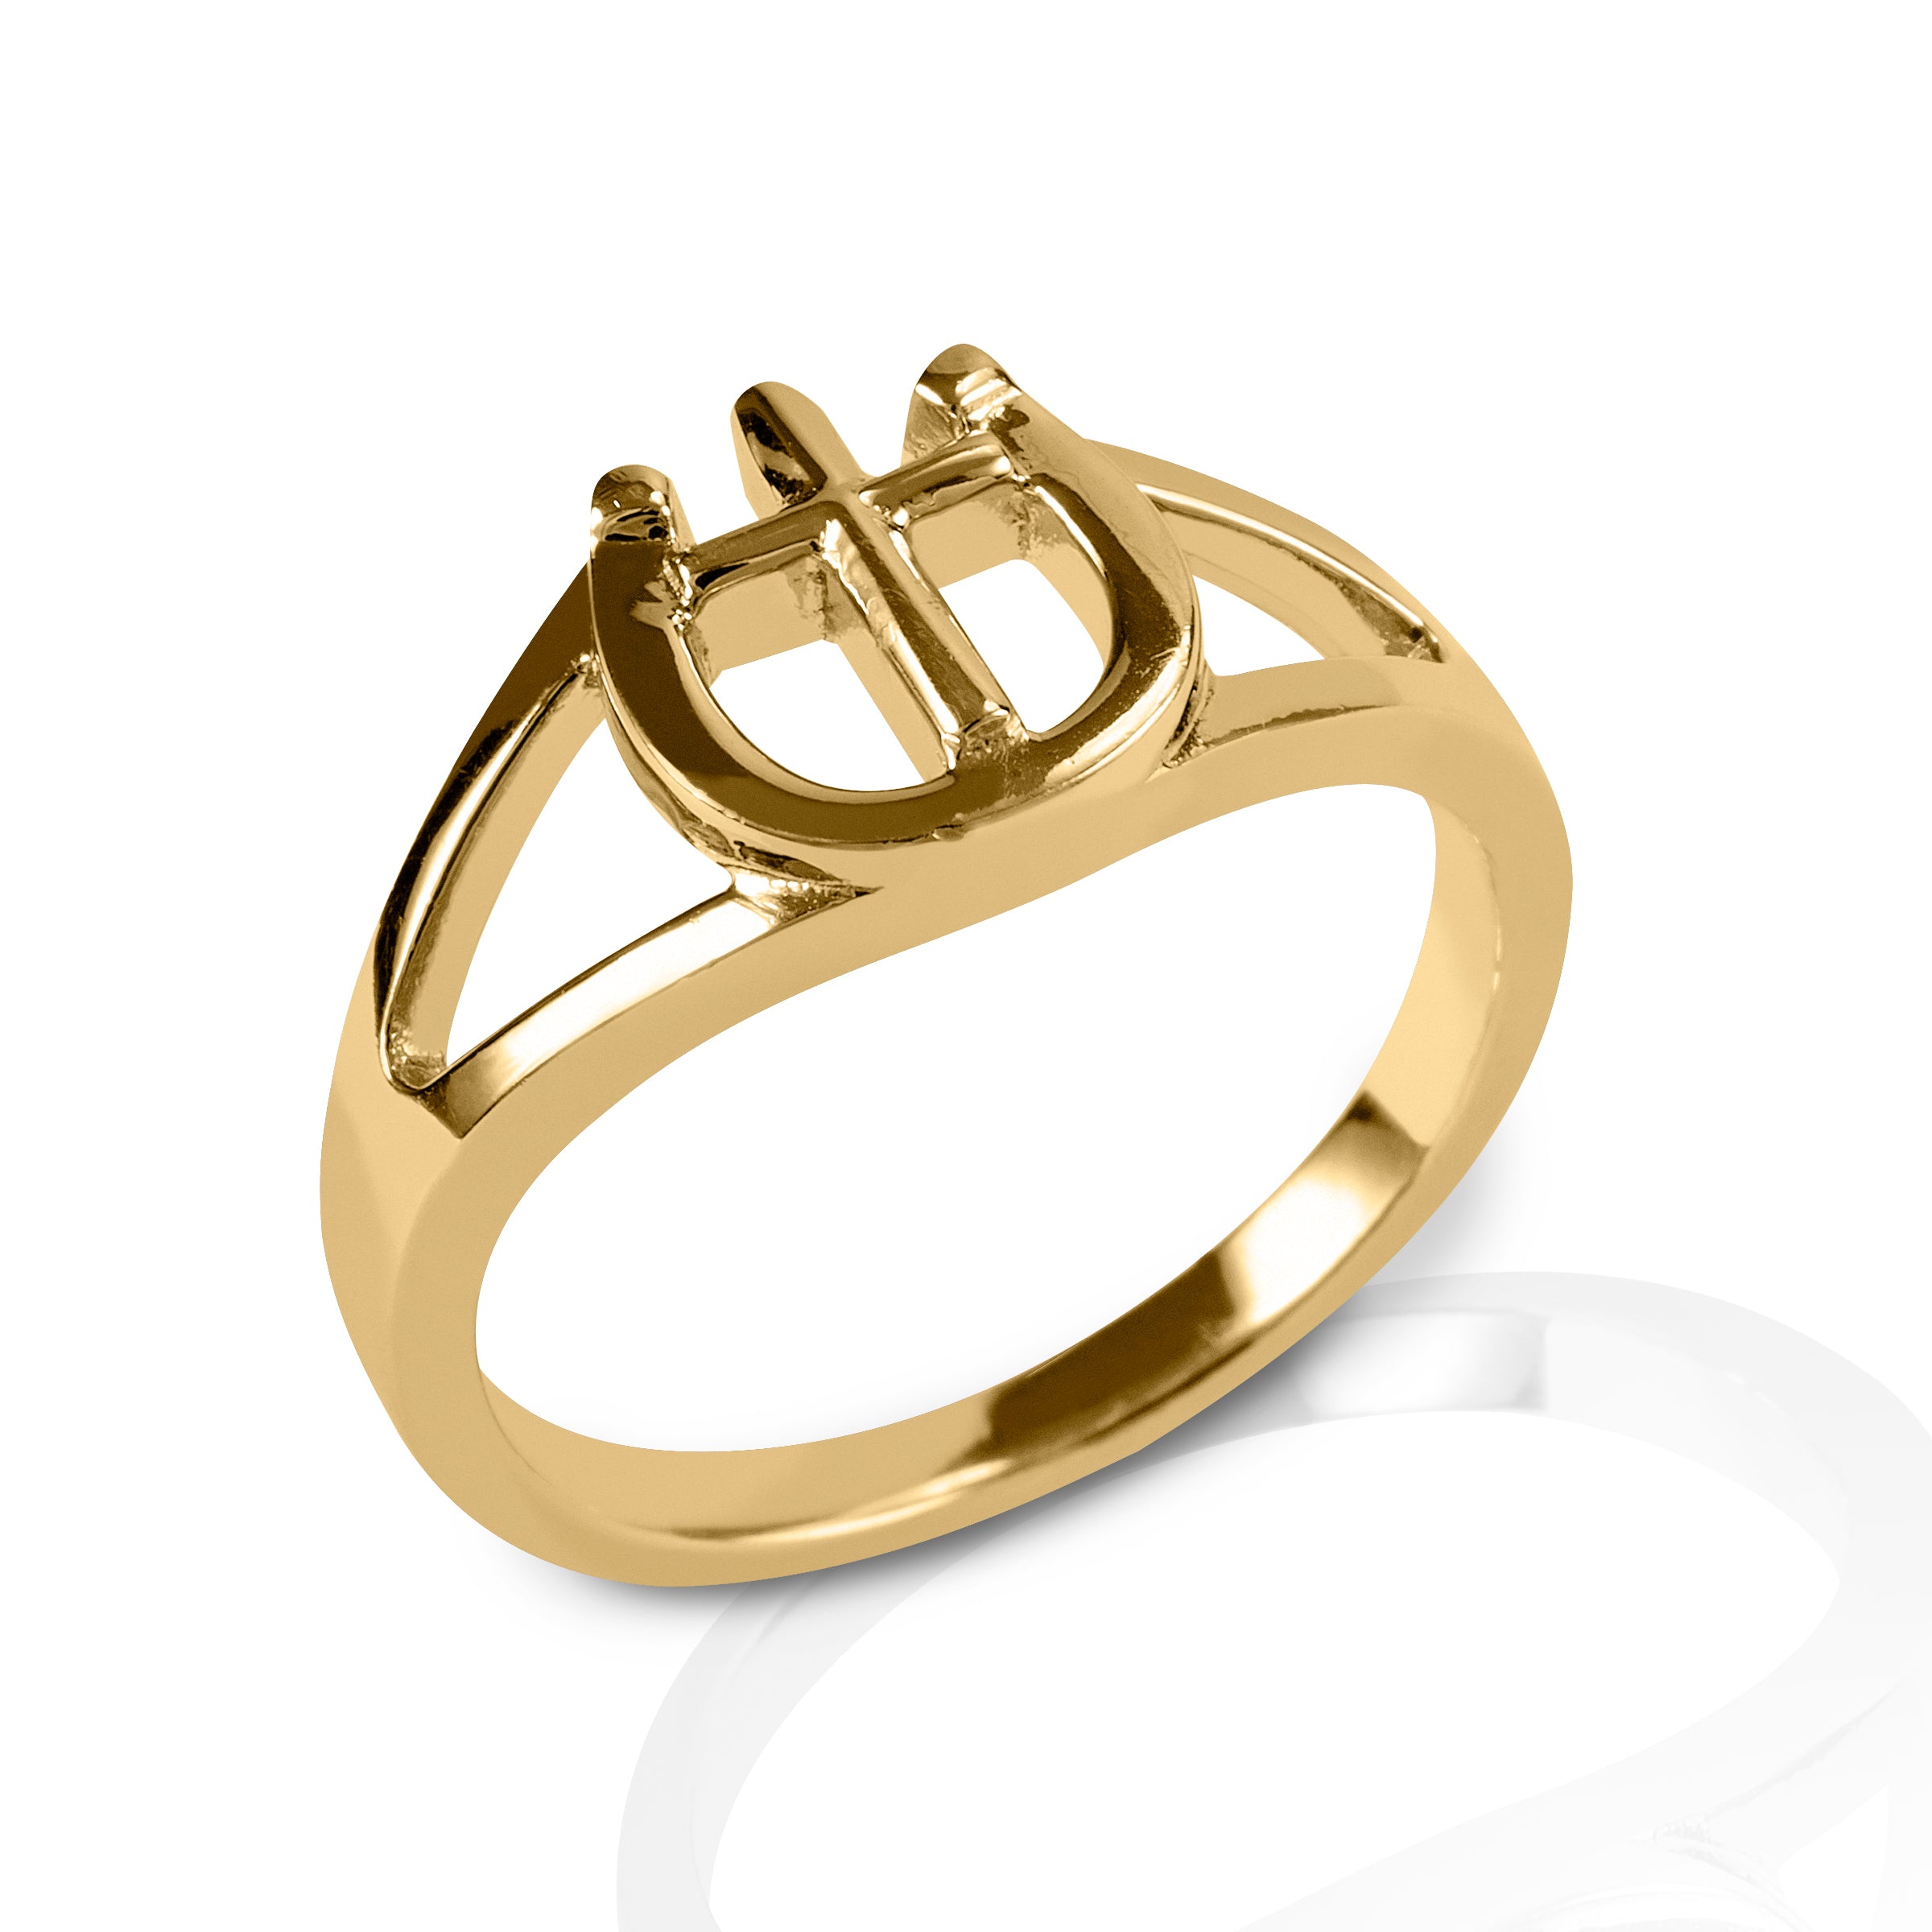 Buy Sullery Trishul Damru Design Adjustable Gold Metal Ring Online at Low  Prices in India - Paytmmall.com